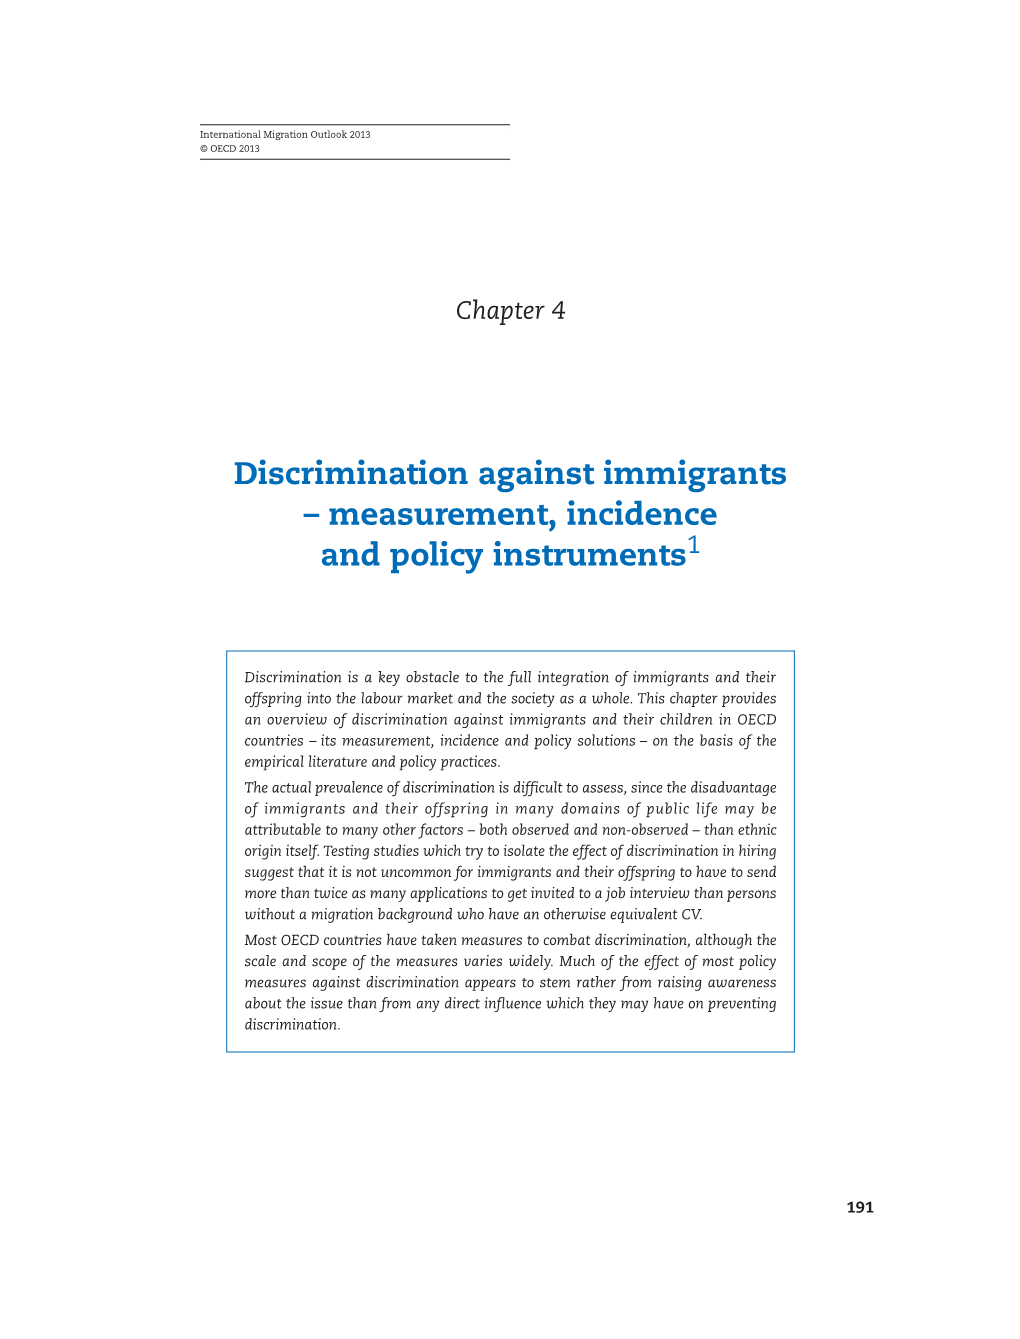 Discrimination Against Immigrants – Measurement, Incidence and Policy Instruments1